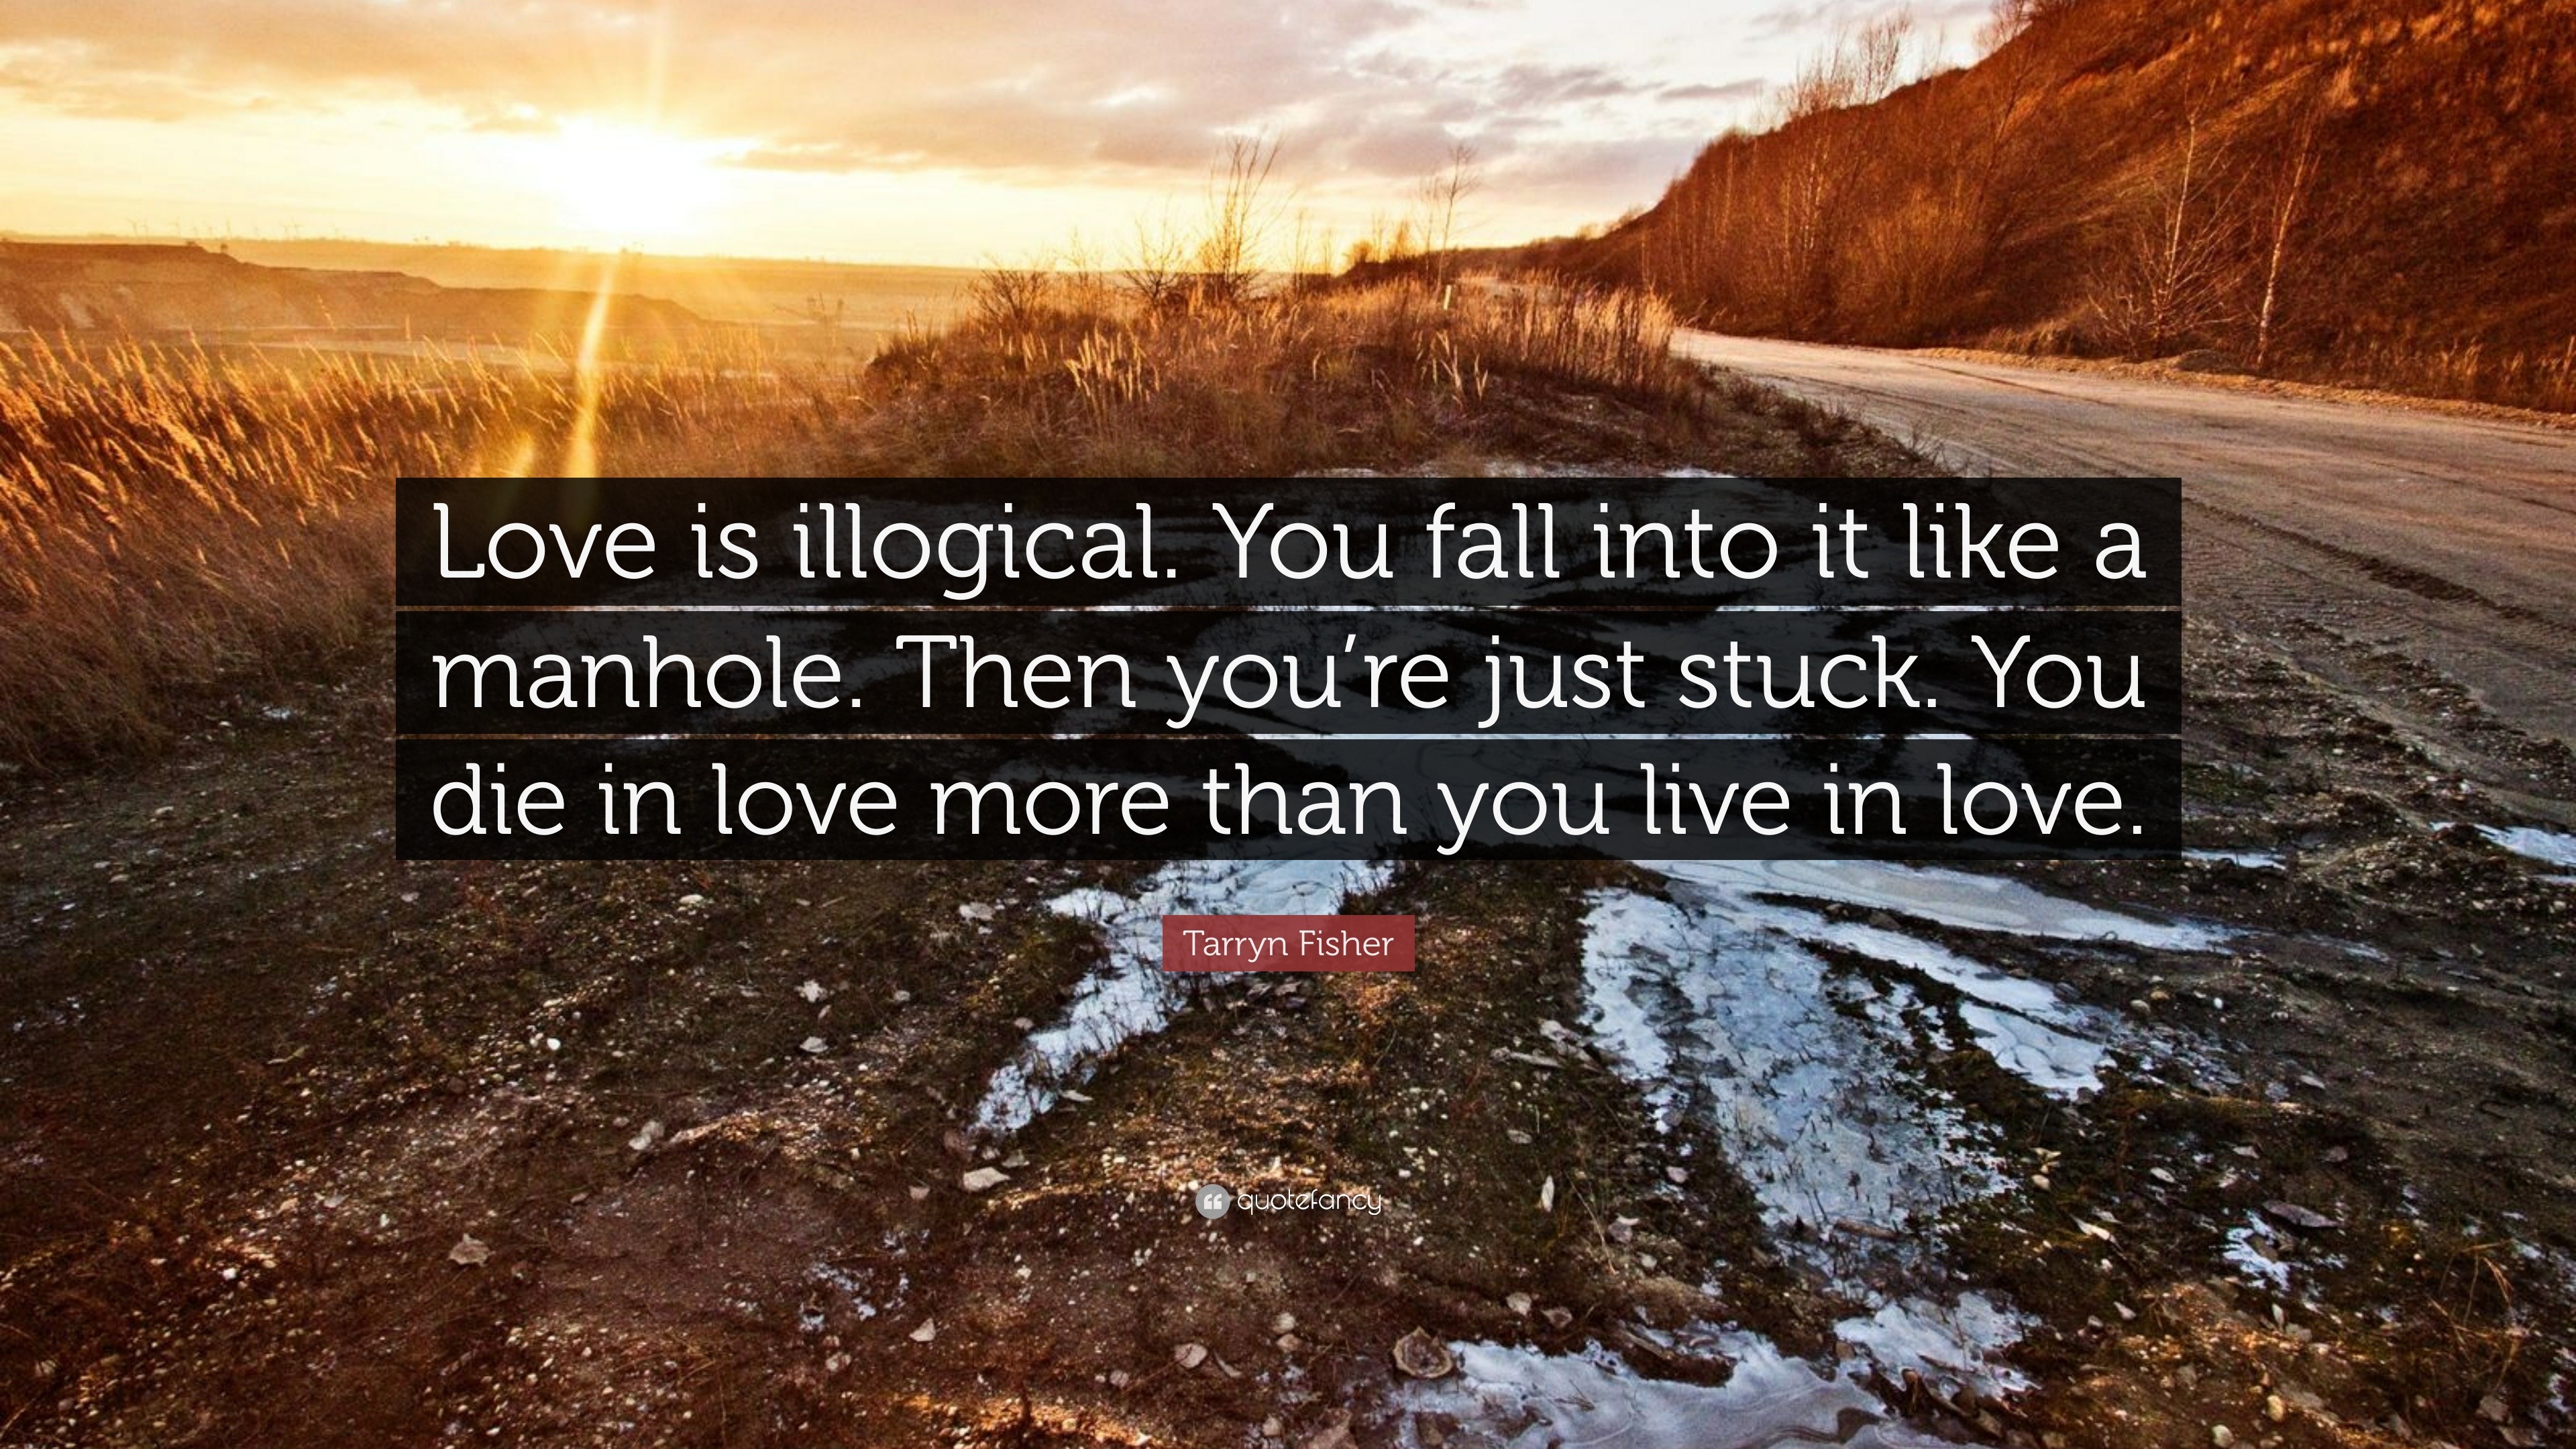 Tarryn Fisher Quote “Love is illogical You fall into it like a manhole